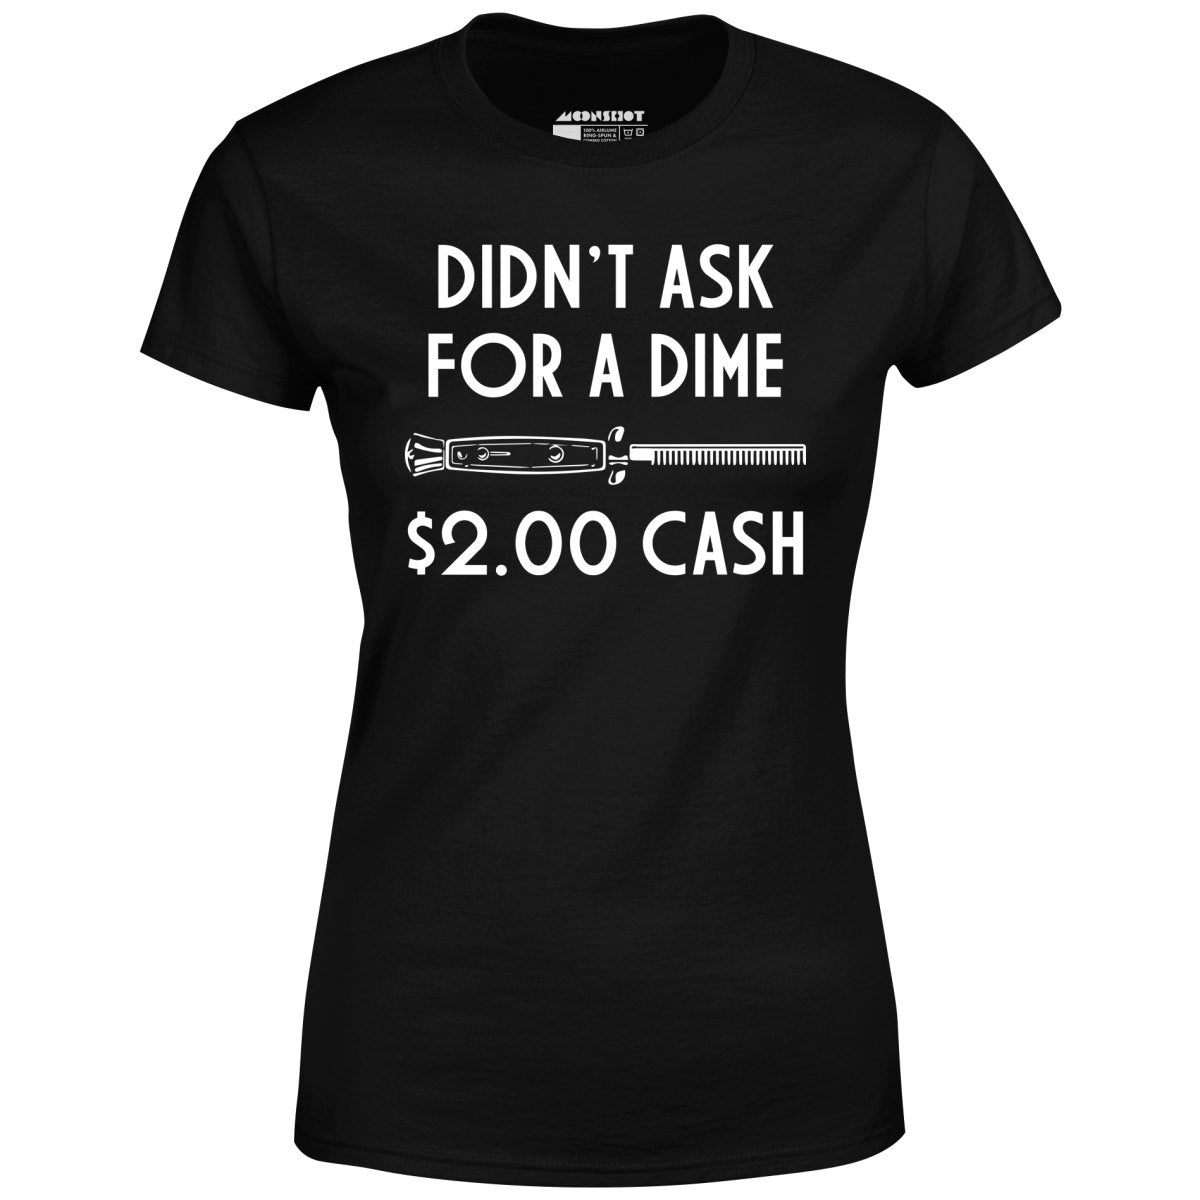 Didn't Ask For a Dime - Women's T-Shirt